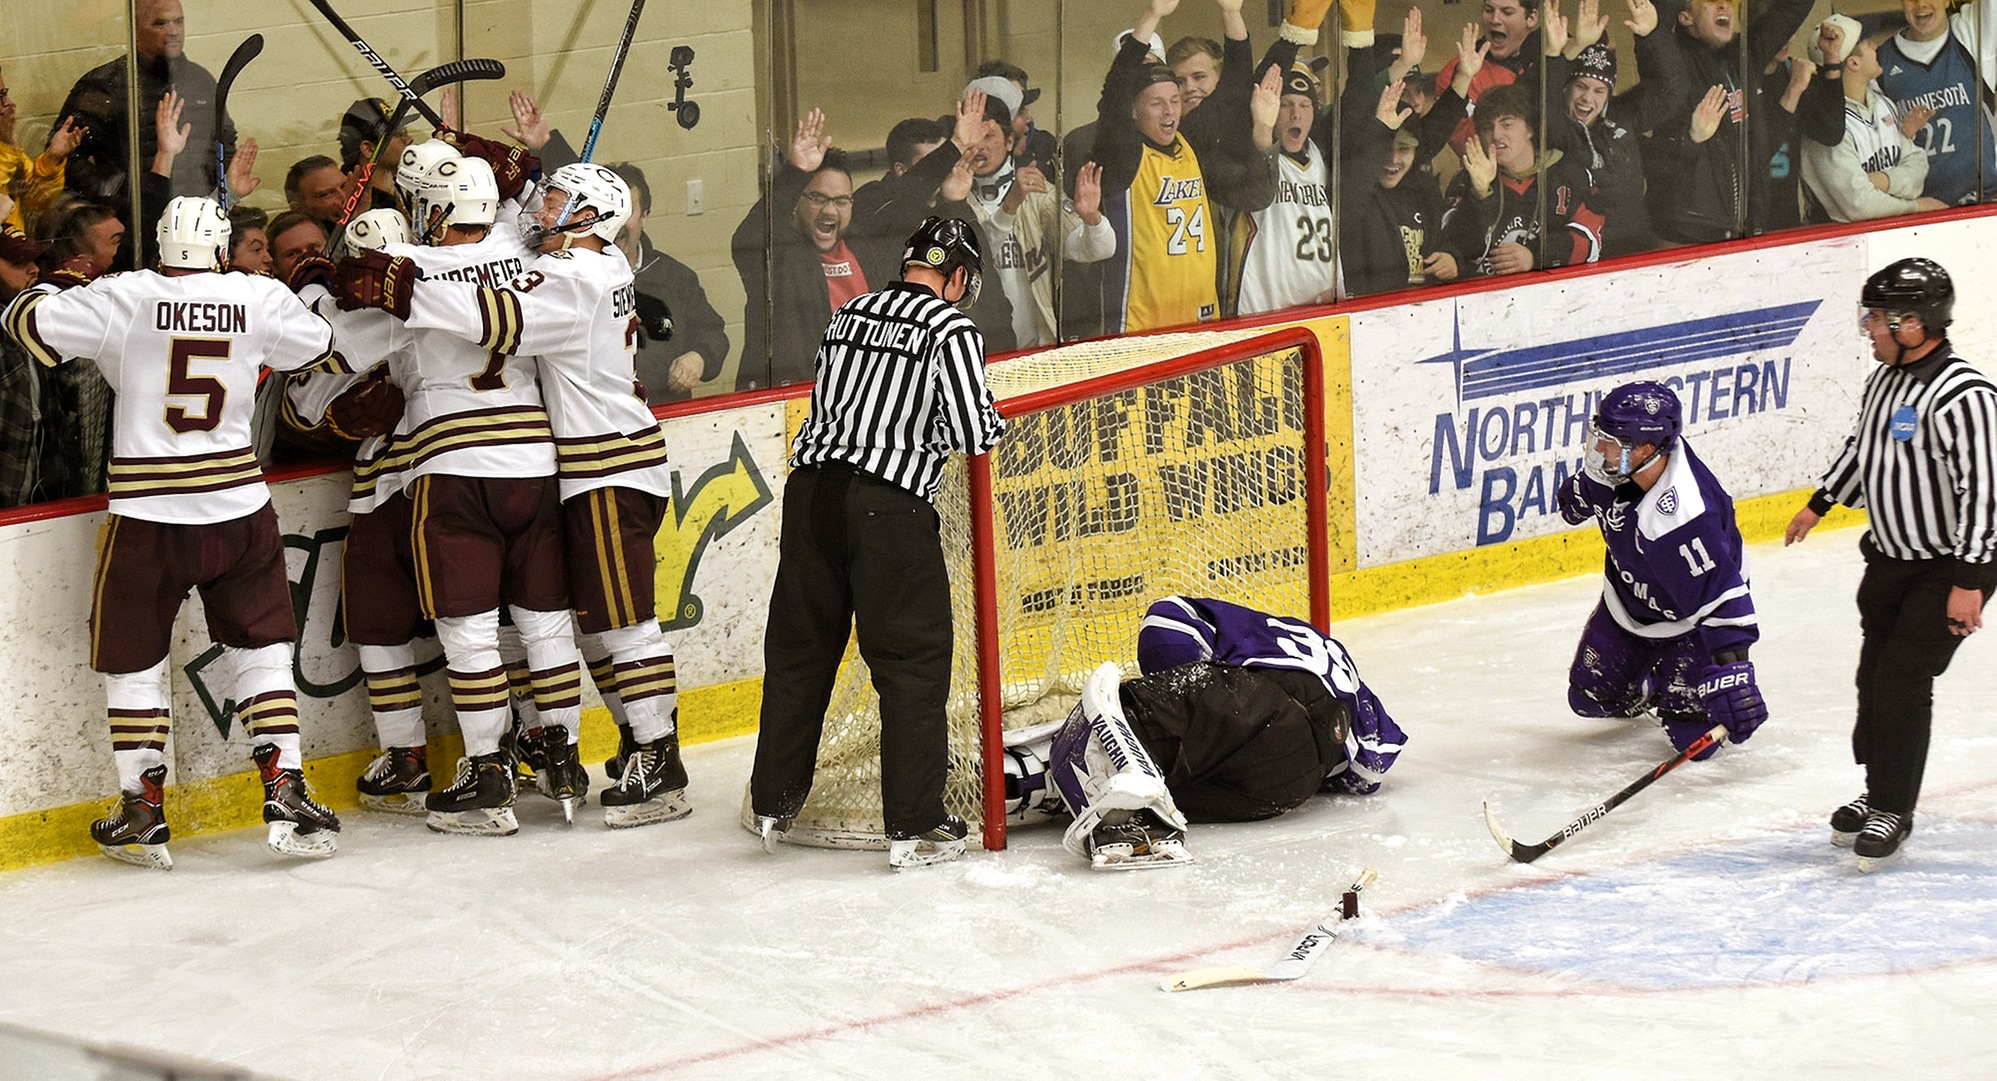 Concordia, and the fans, celebrate Jake Ellingson's goal in the third period of the Cobbers' 4-2 win over St. Thomas.